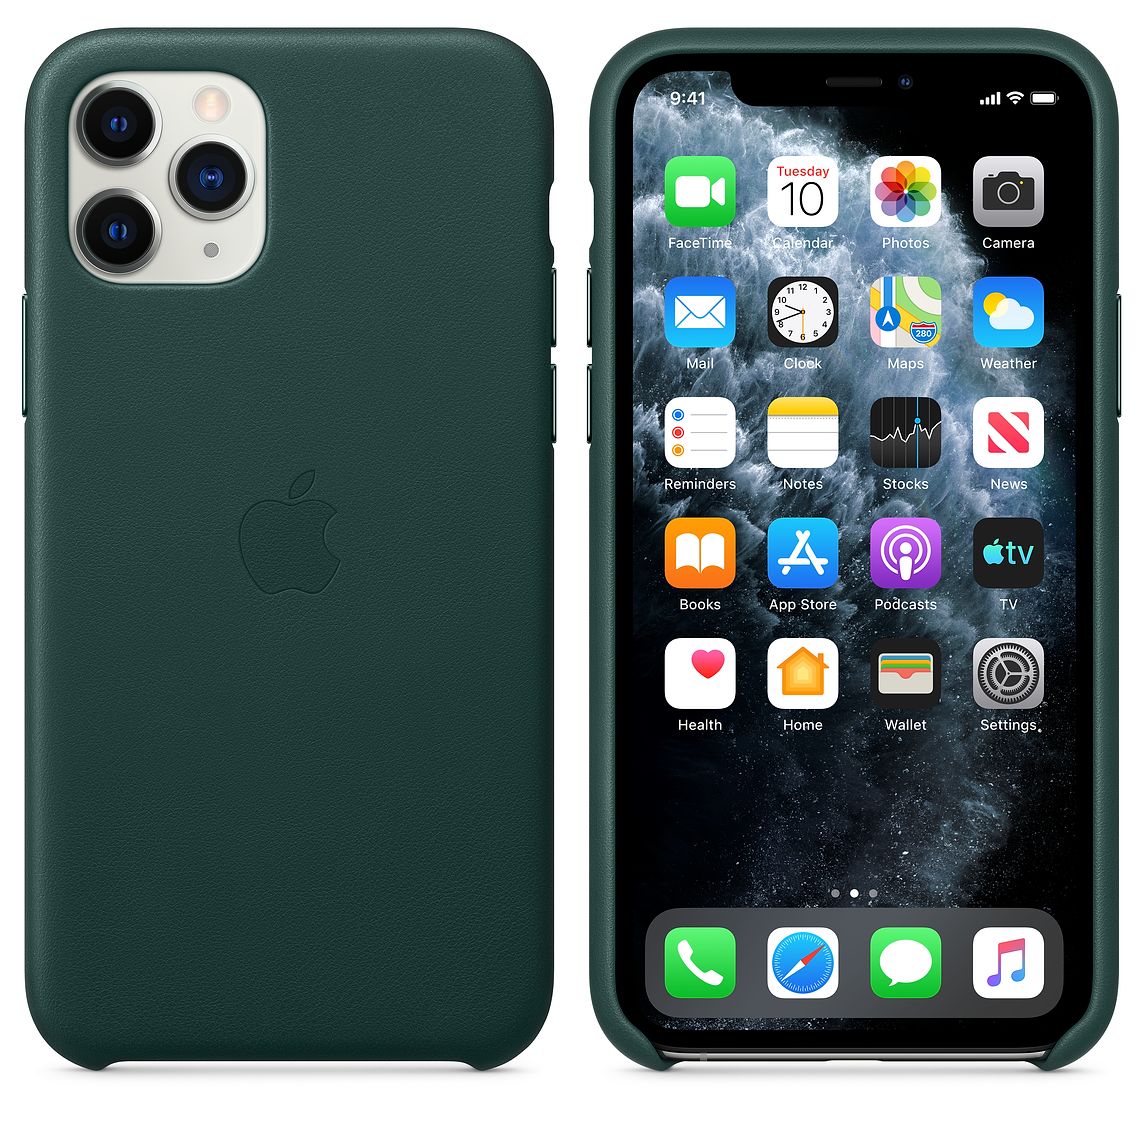 The best cases for iPhone 11, 11 Pro and 11 Pro Max